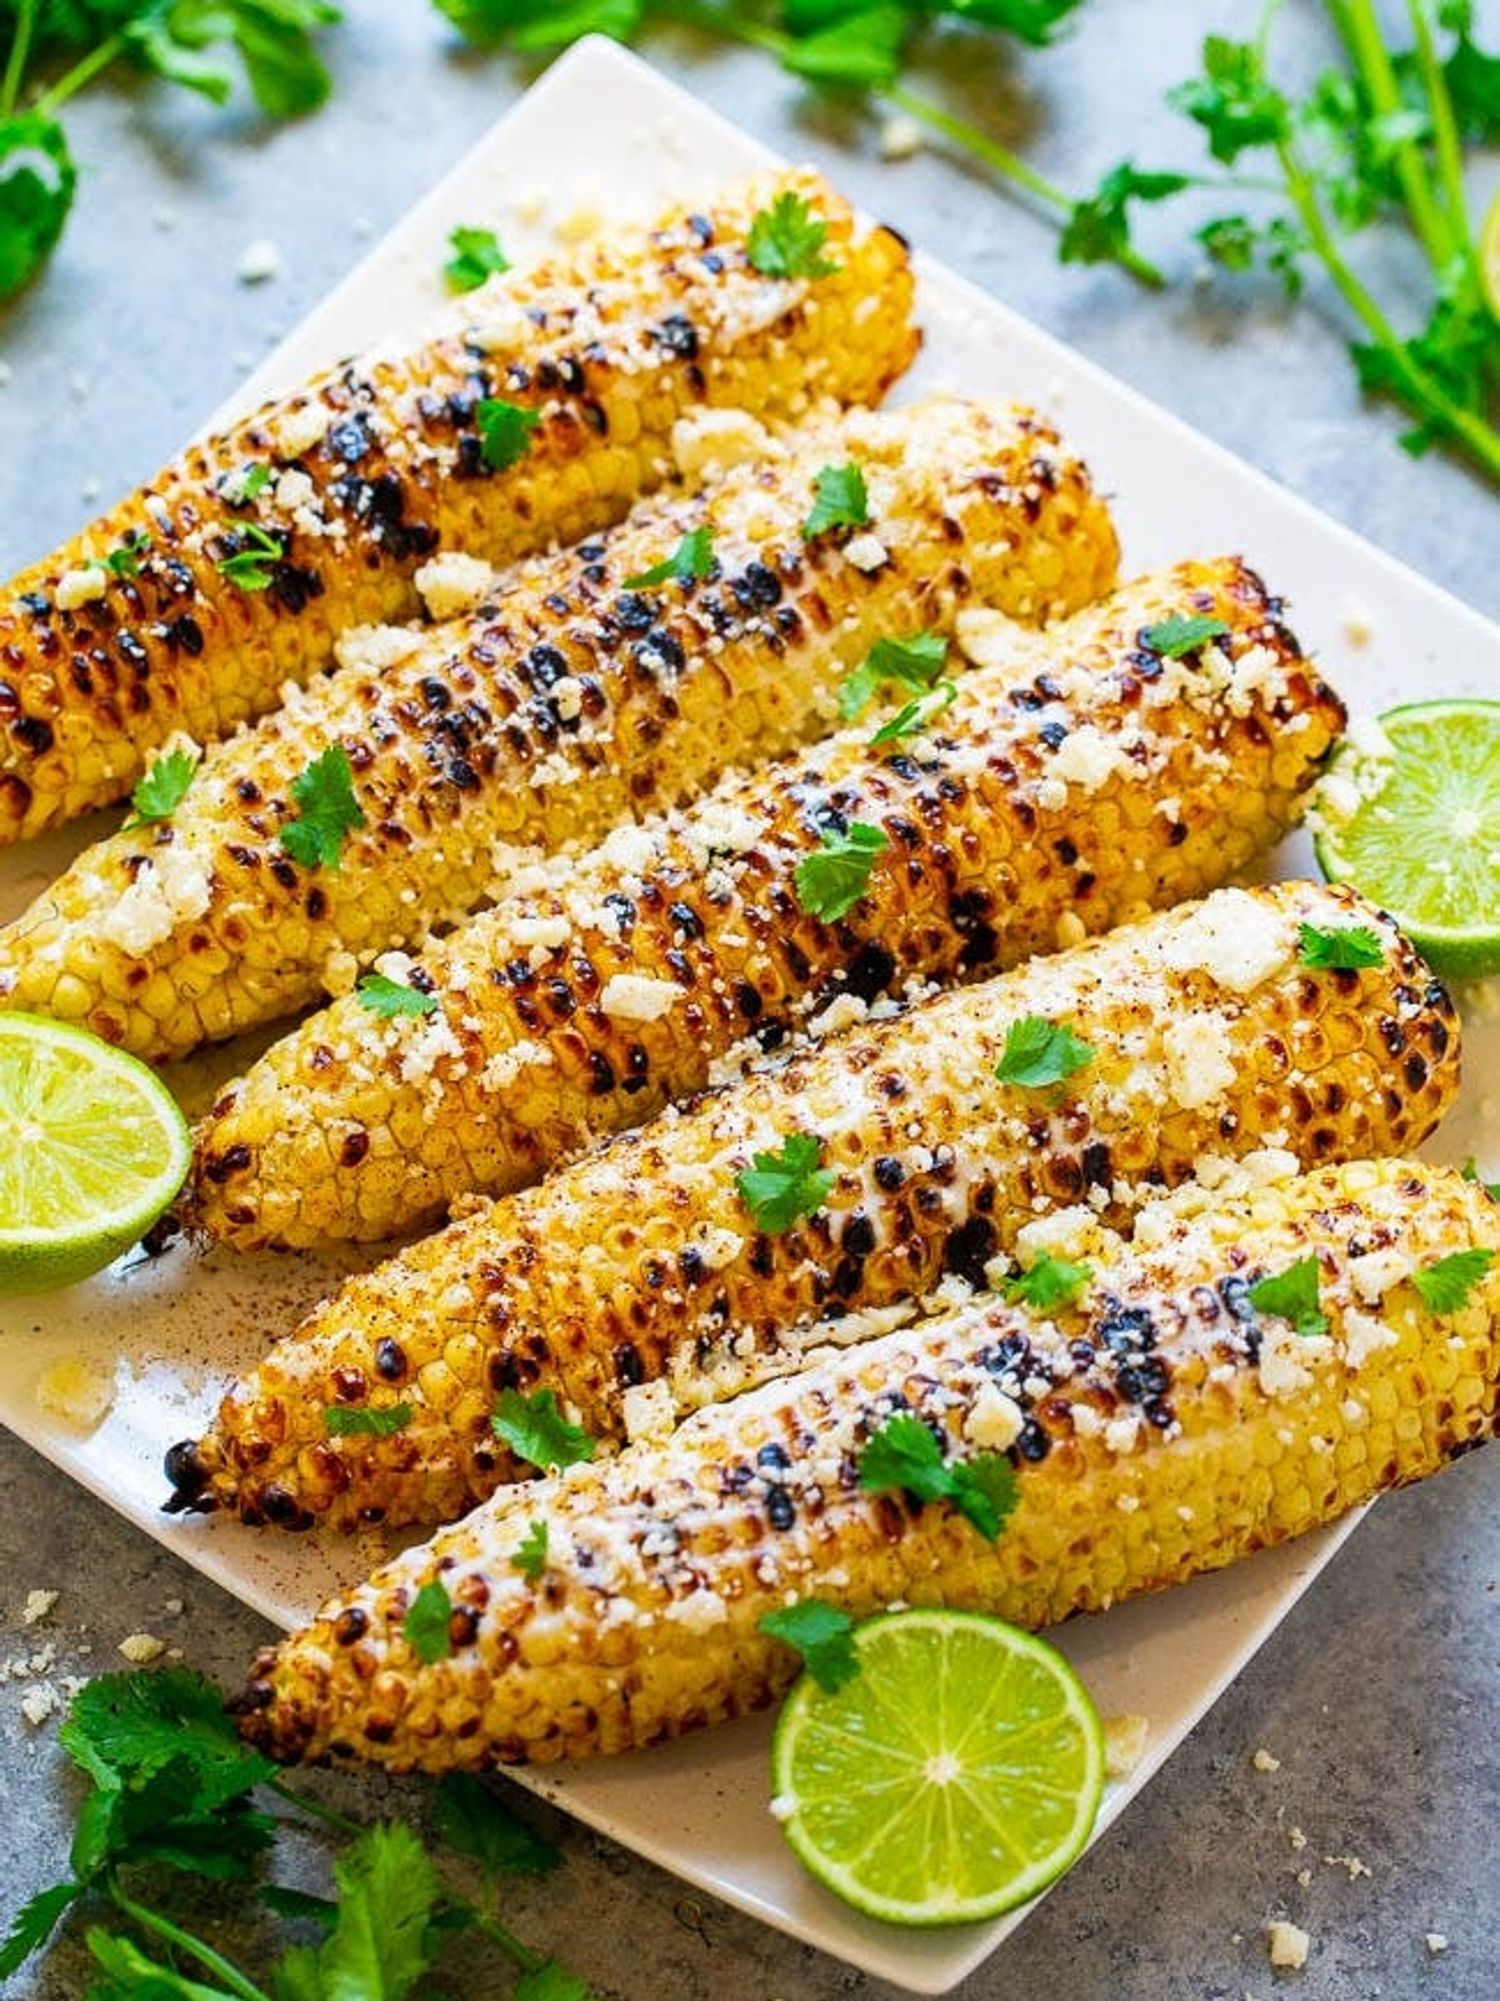 Grilled Mexican Corn (Elote)